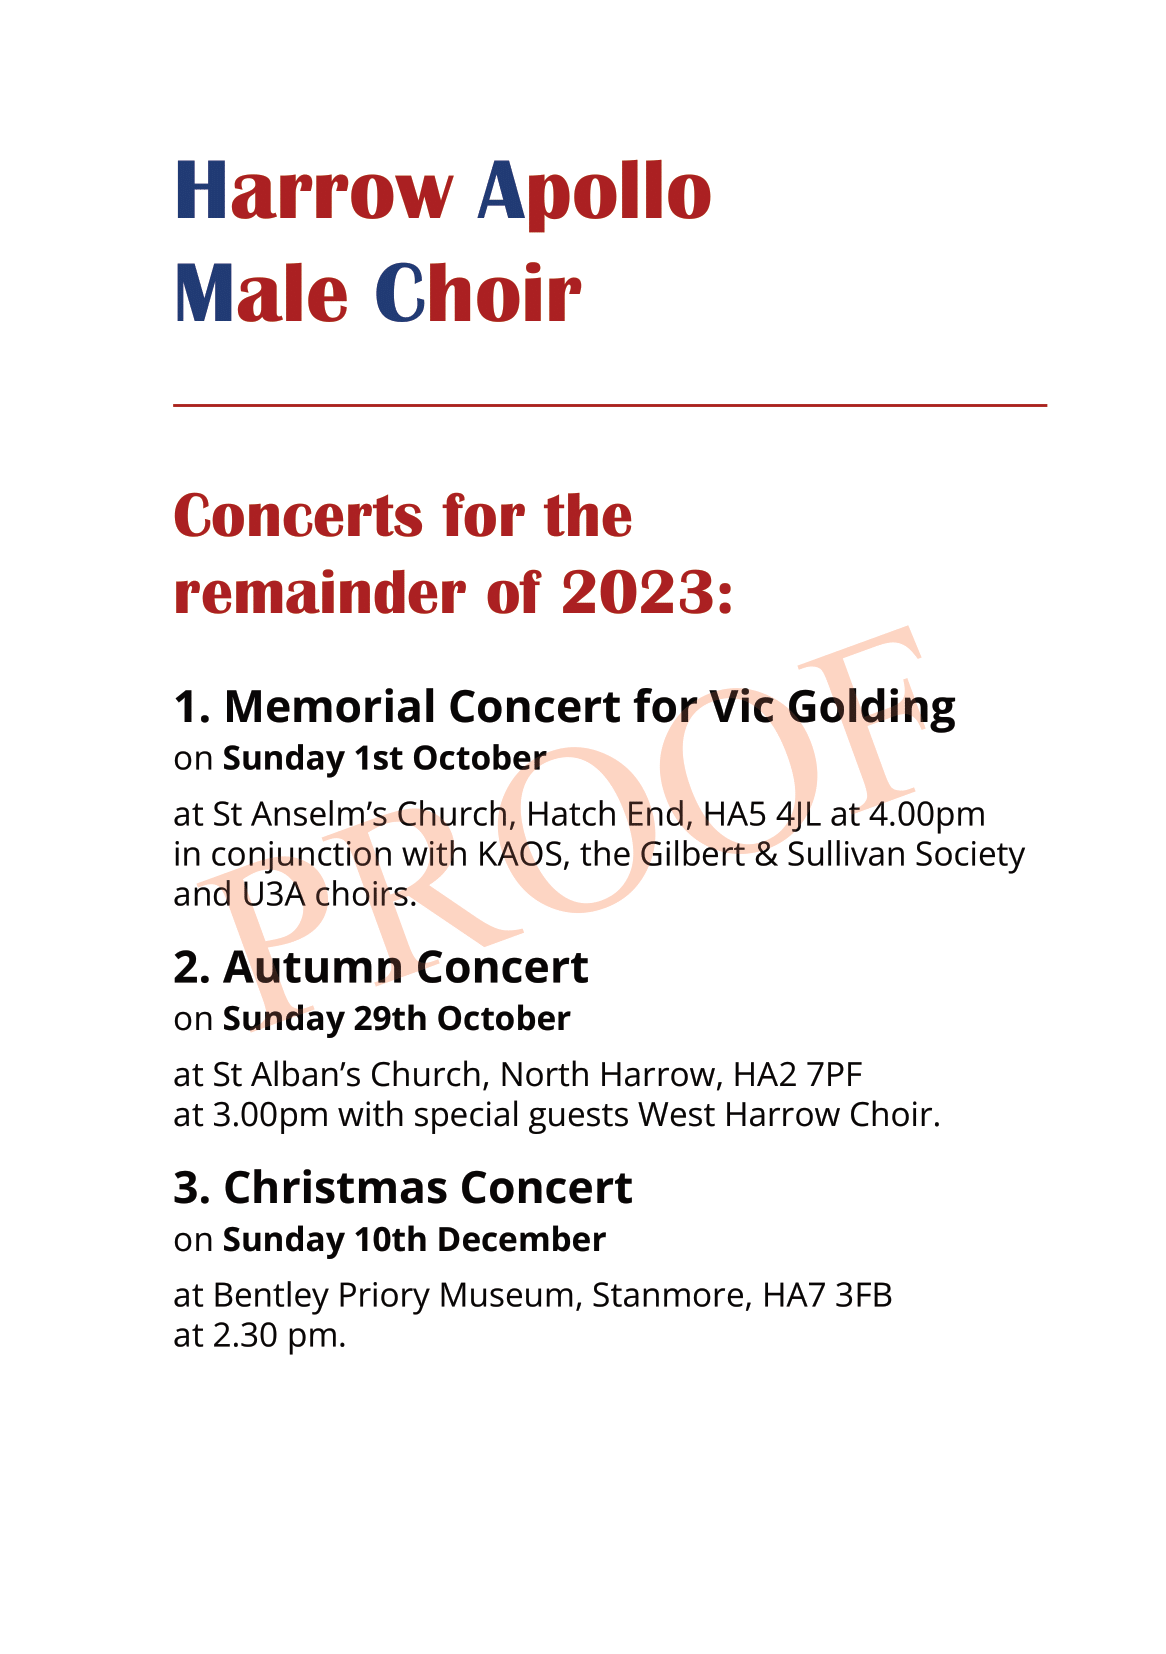 2023 concerts: memorial concert for Vic Golding October 1st 4pm, Autumn concert October 29th 3pm, Christmas concert December 10th 2:30pm